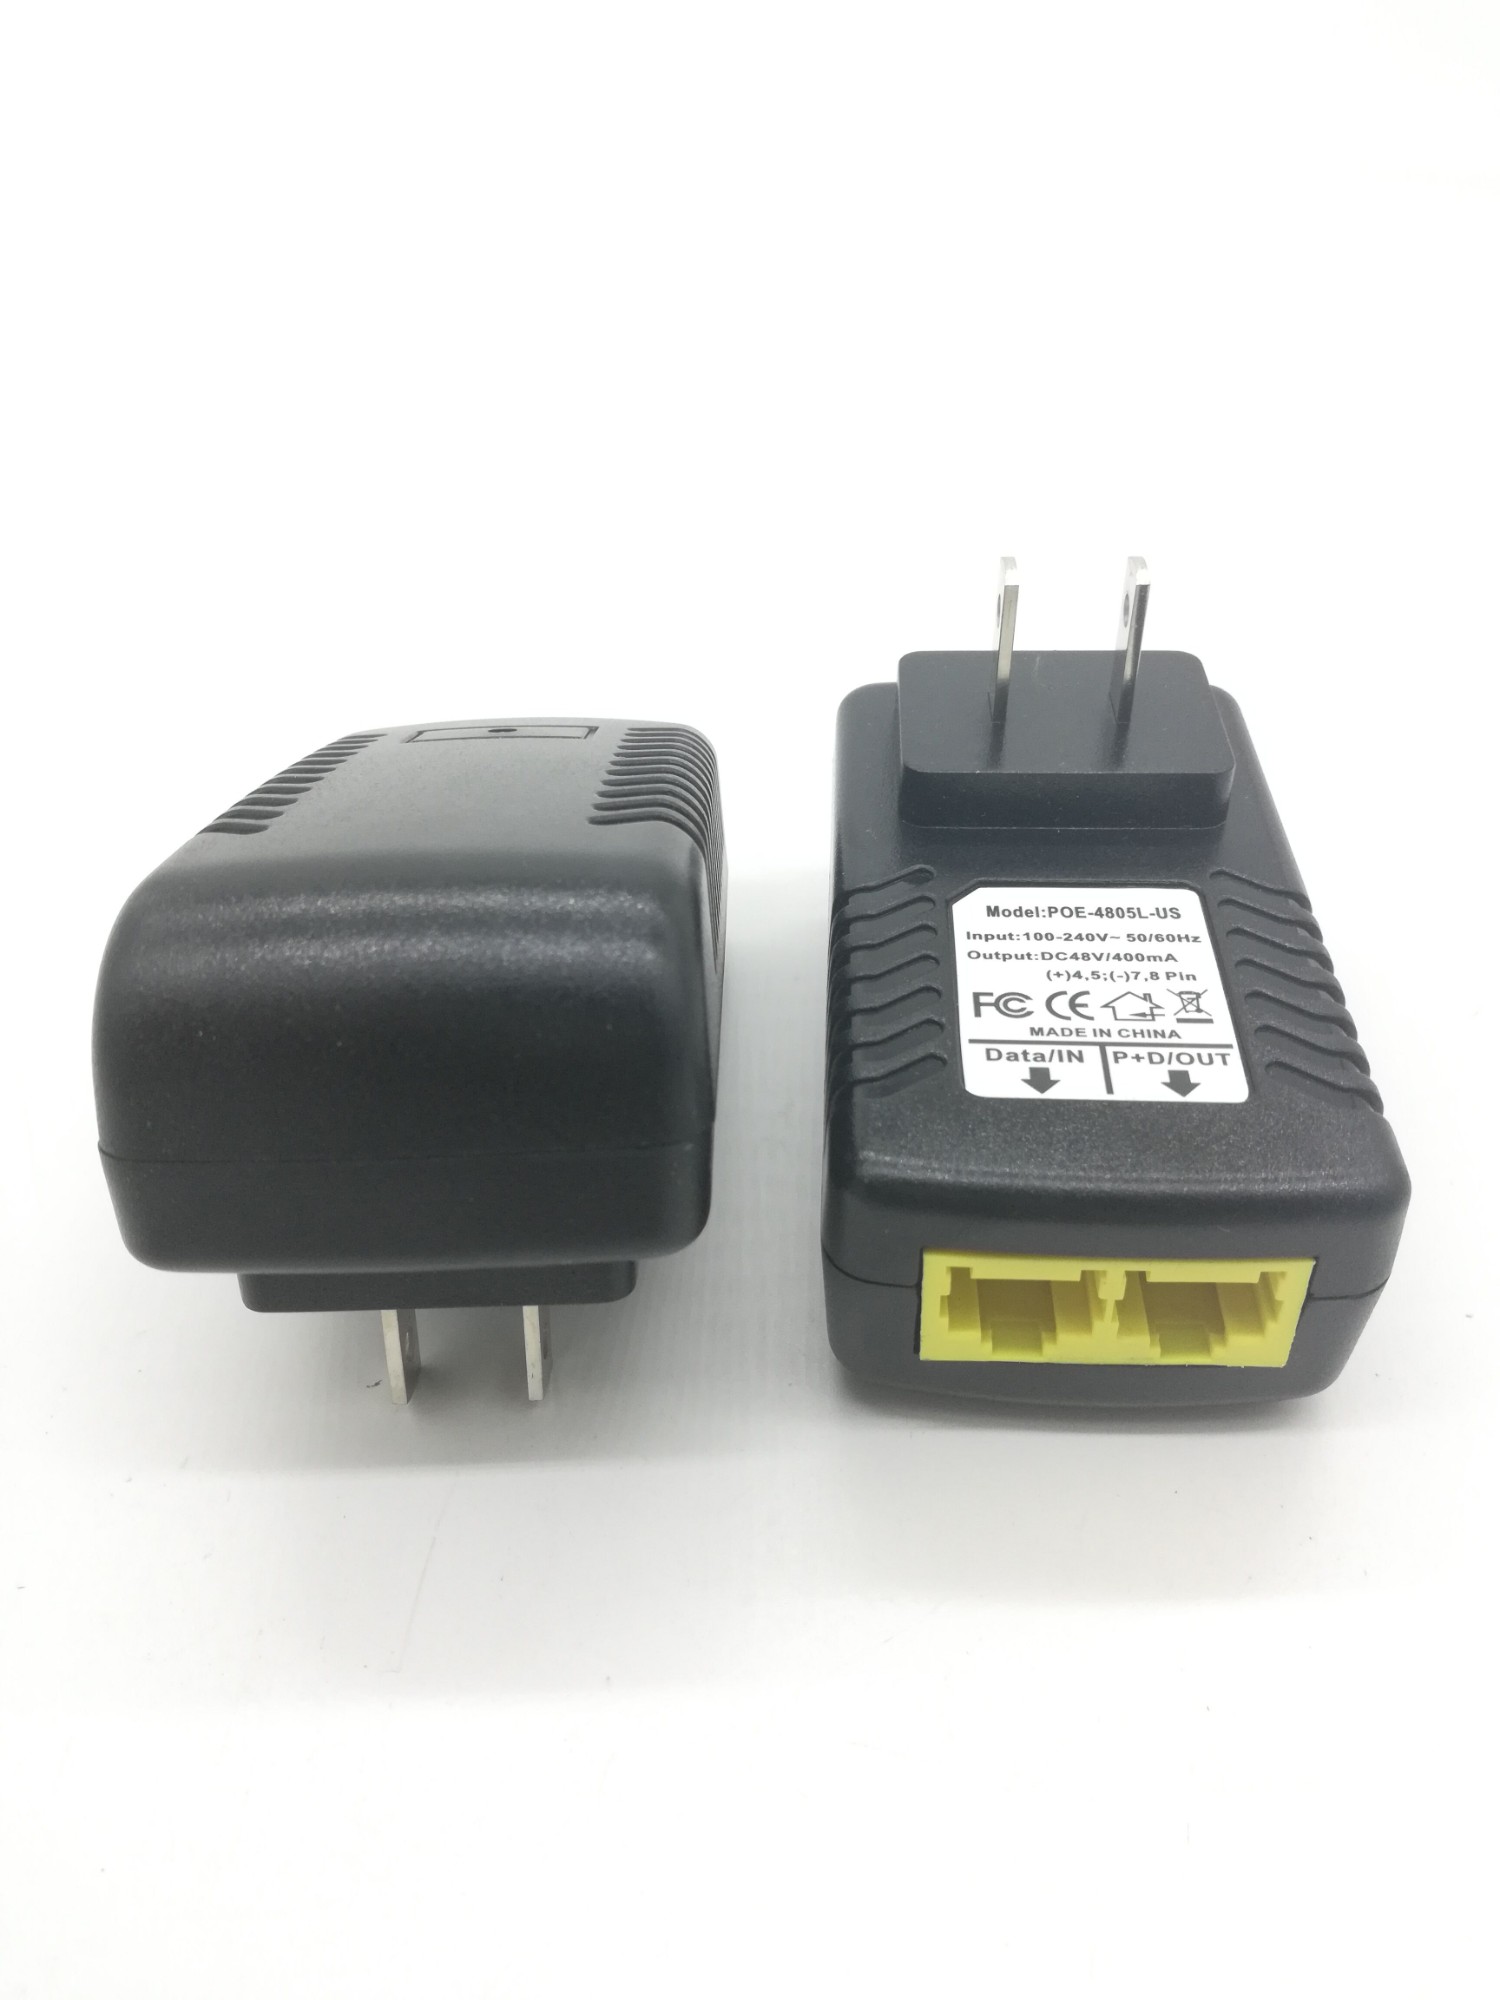 POE4805 Passive 48V 0.5A high working efficiency of 90-264VAC wide voltage input PoE Injector with high quality